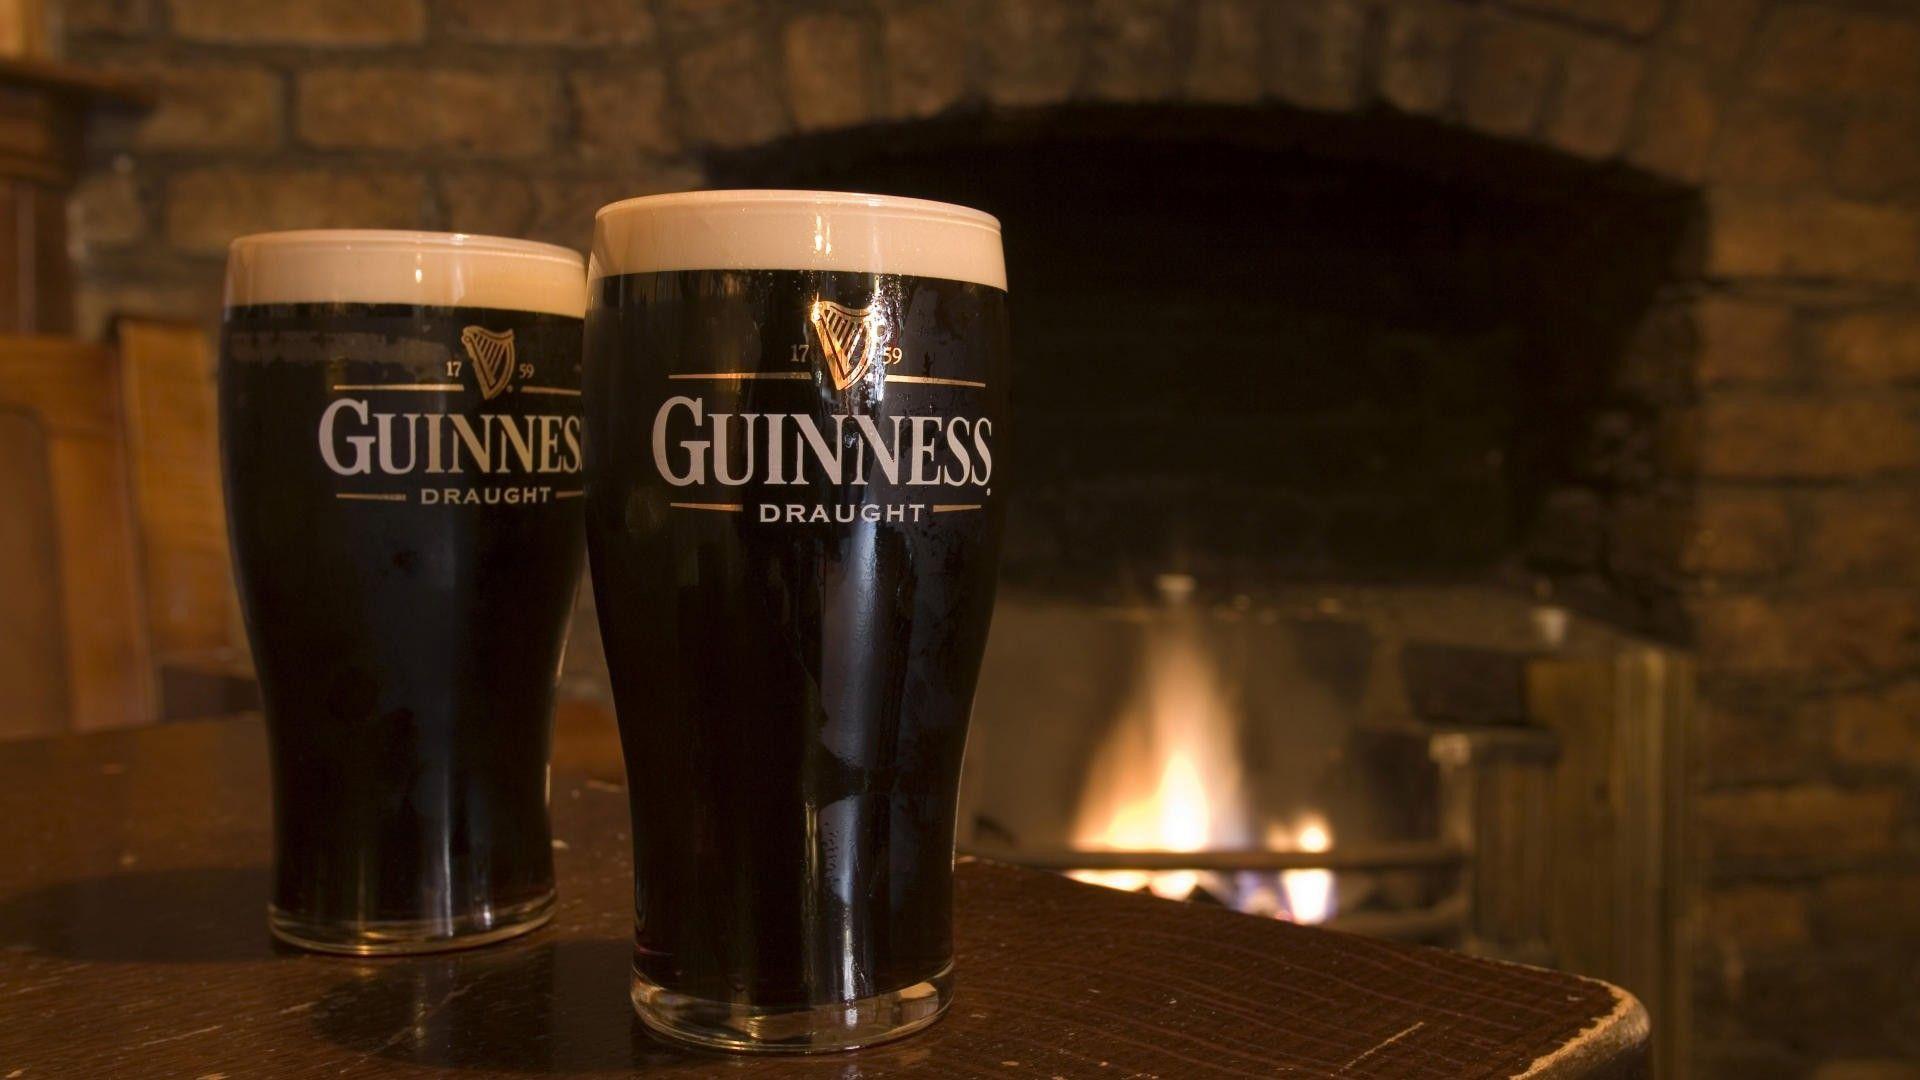 Guinness is by far the most requested Irish beer. People love it